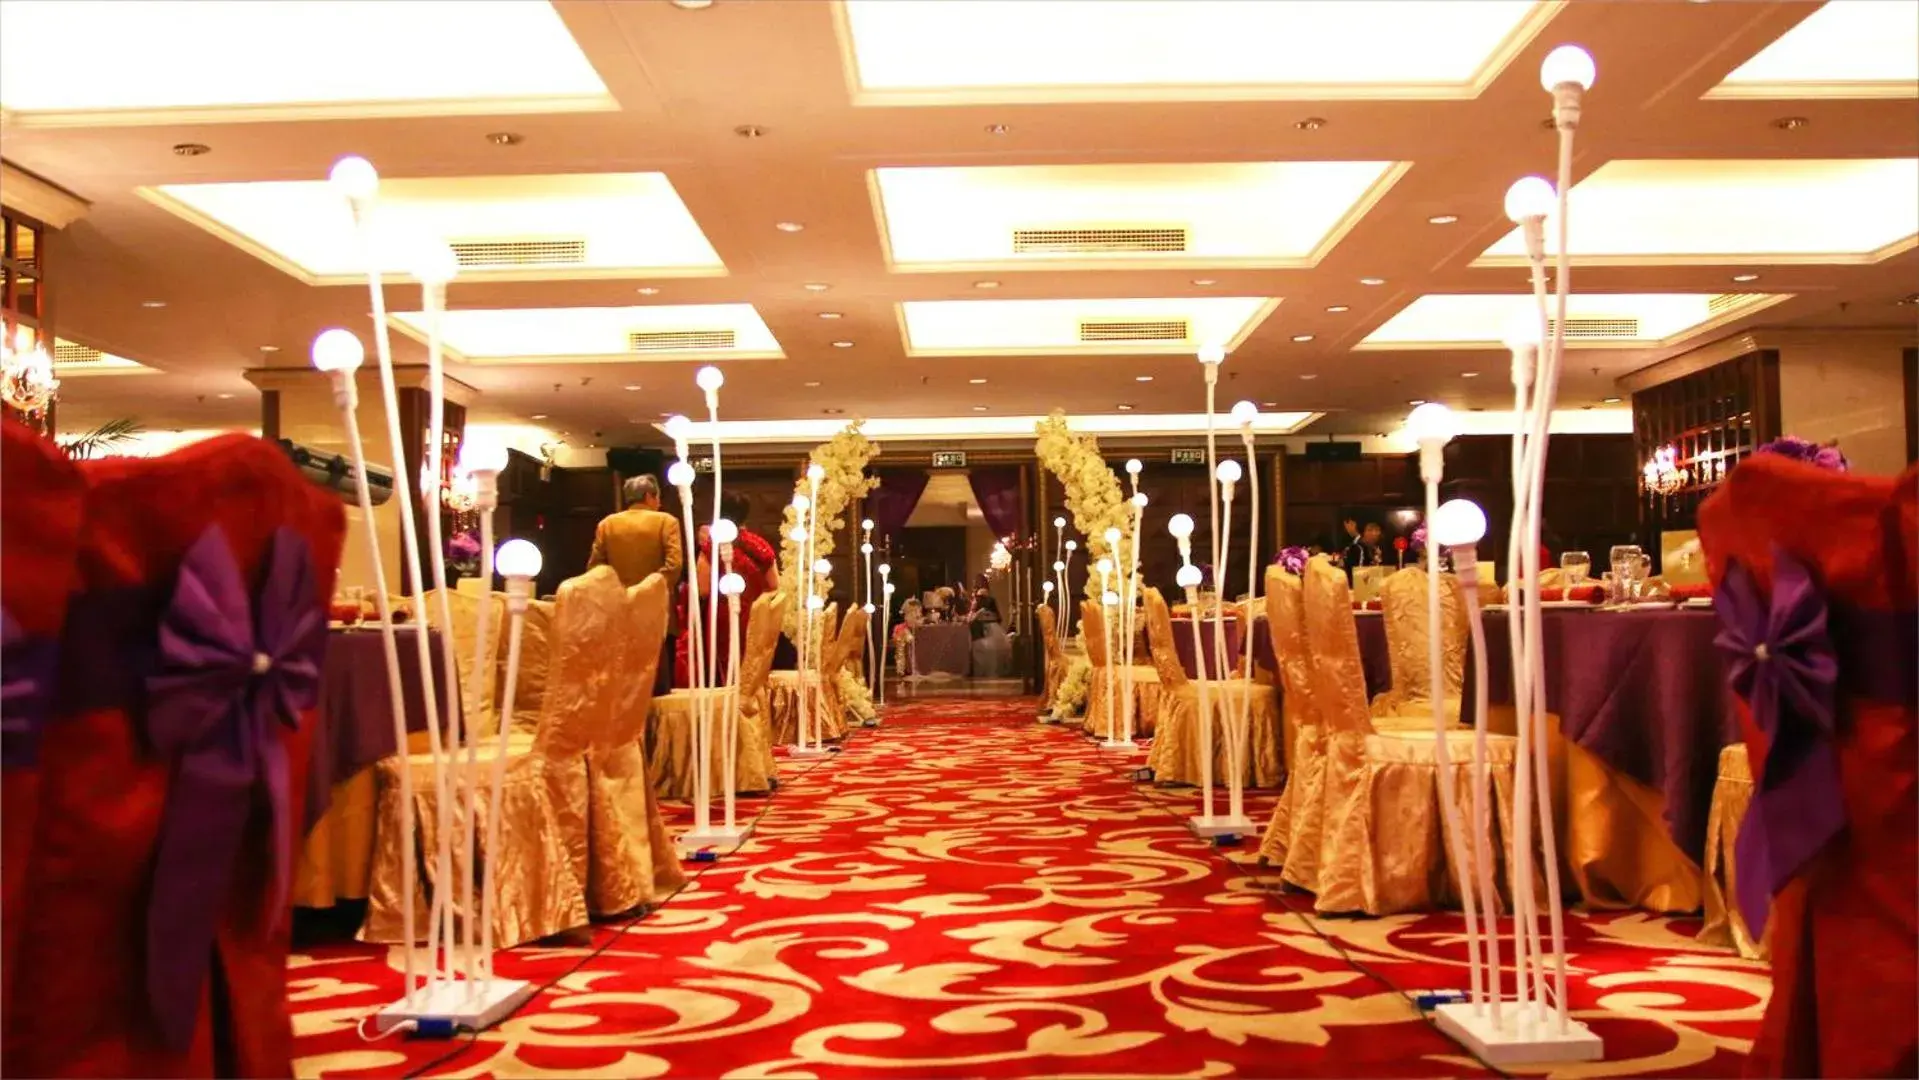 Meeting/conference room, Banquet Facilities in Grand International Hotel